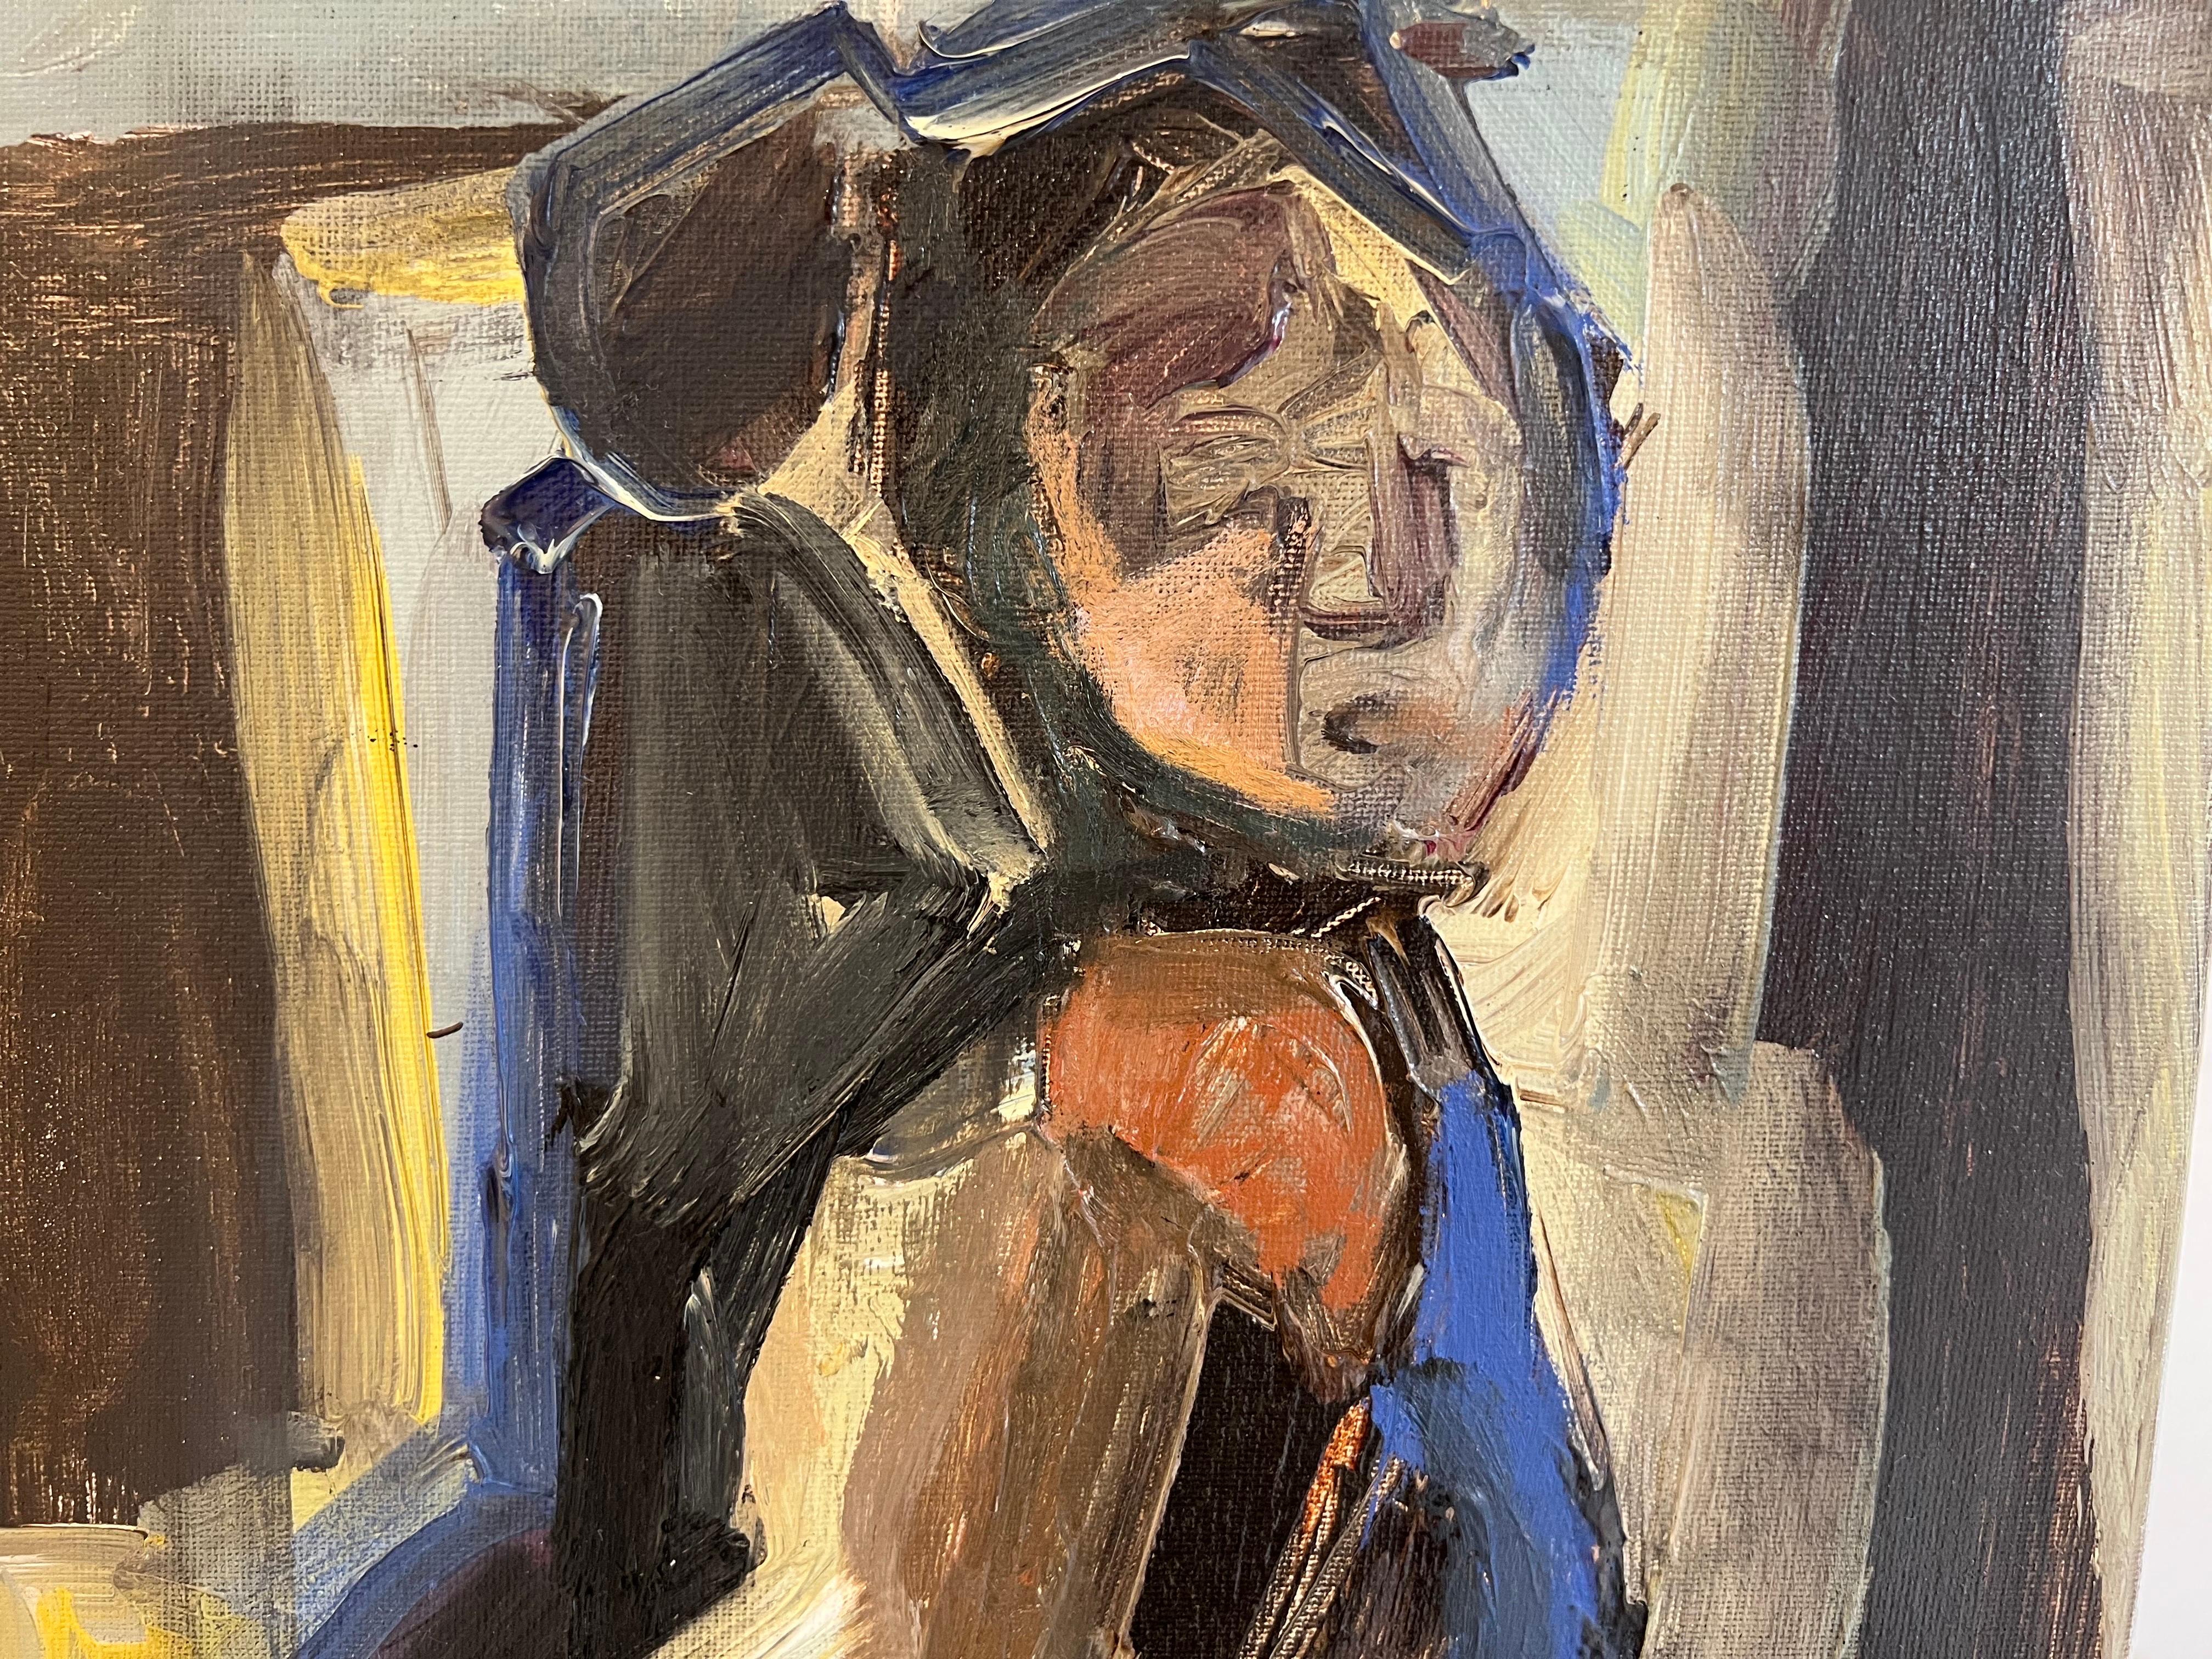 Small Moments by Anne Darby Parker, Contemporary Cubist Figure 1